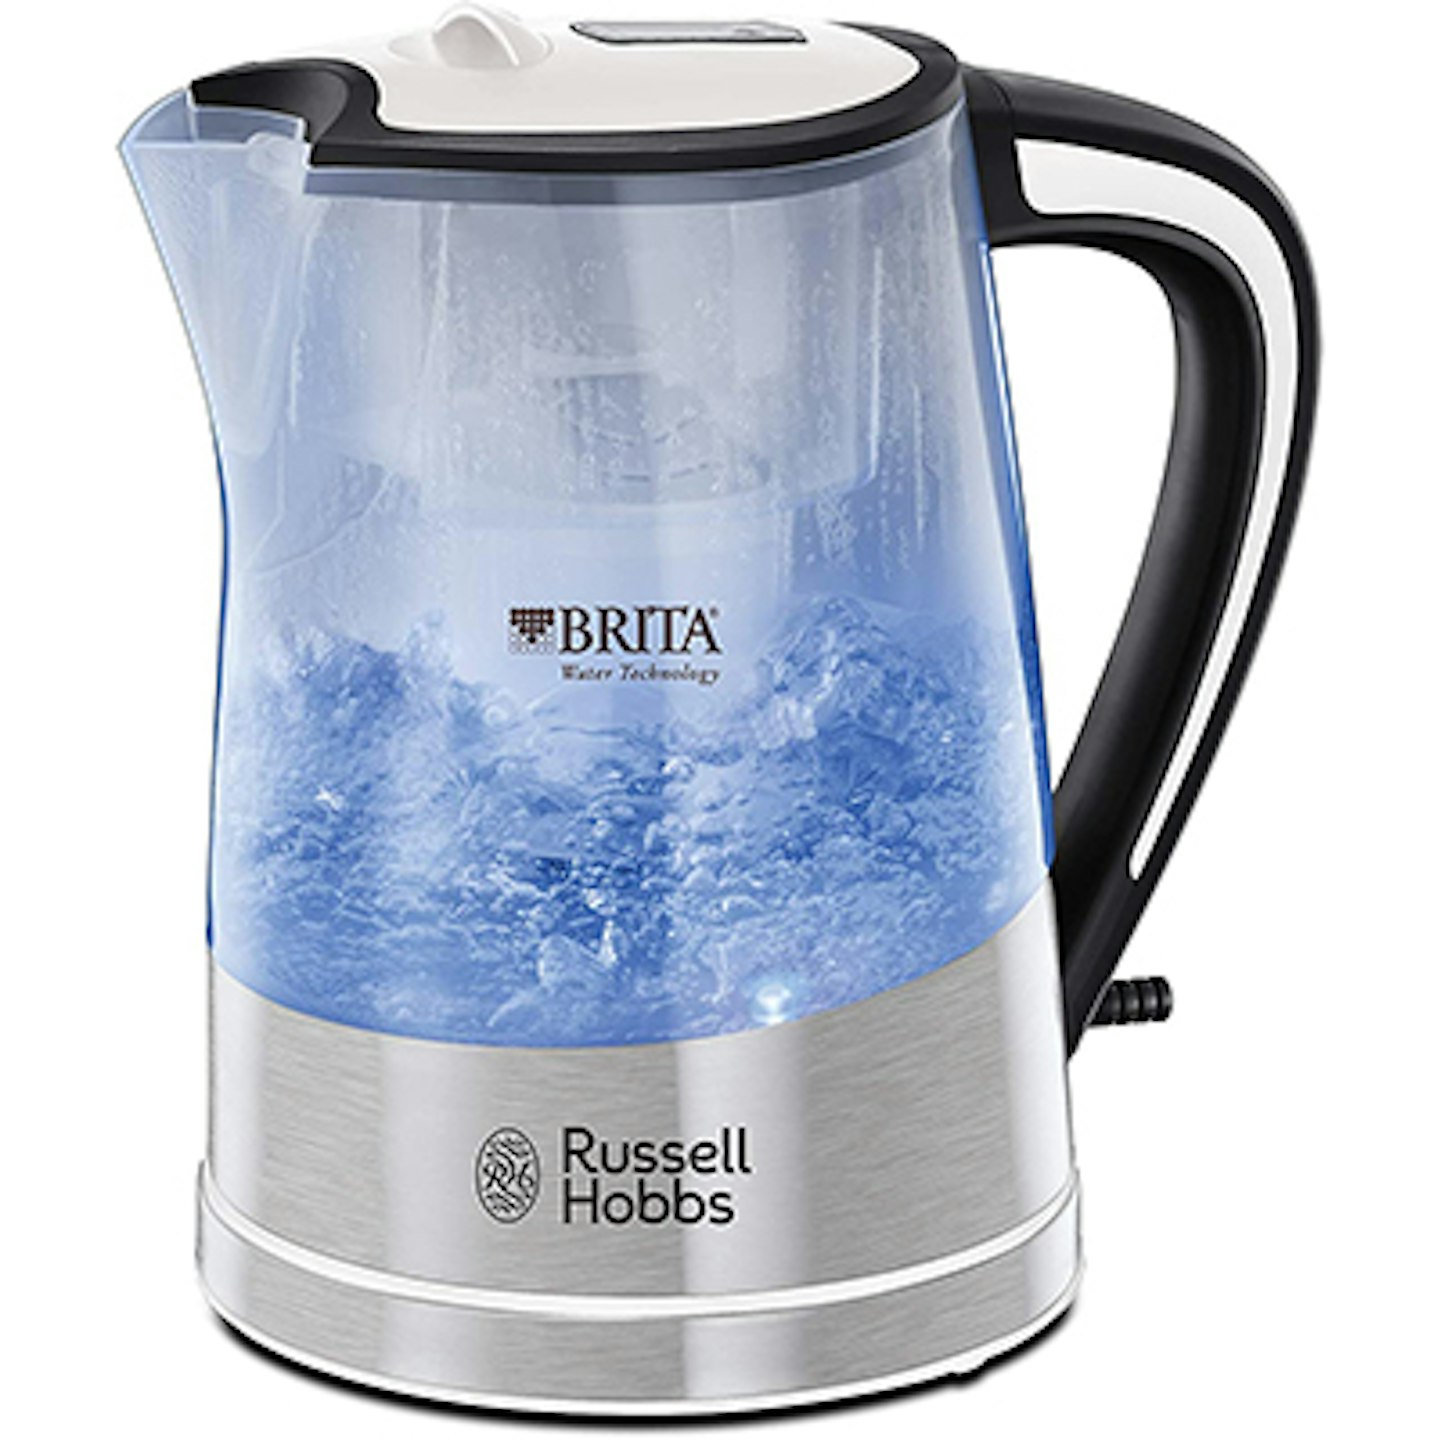 Russell Hobbs Brita Filter Purity Electric Kettle